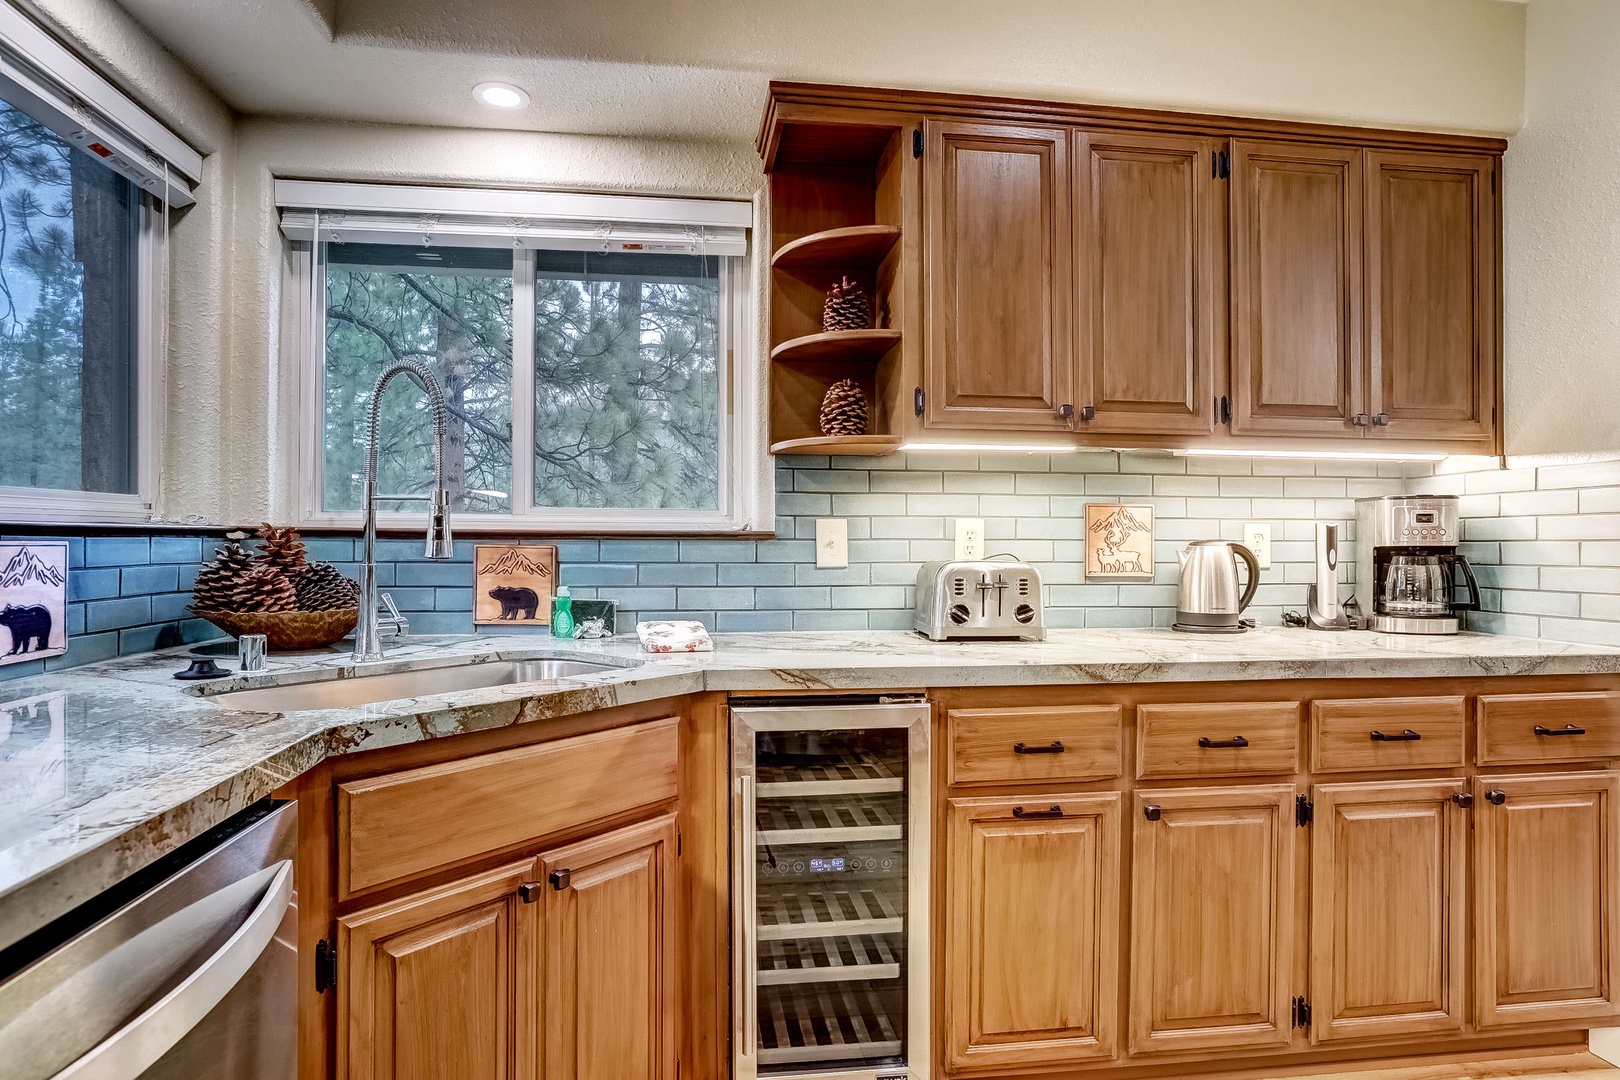 Full kitchen w/ drip coffee maker, toaster, blender, slow cooker, wine fridge, and more!